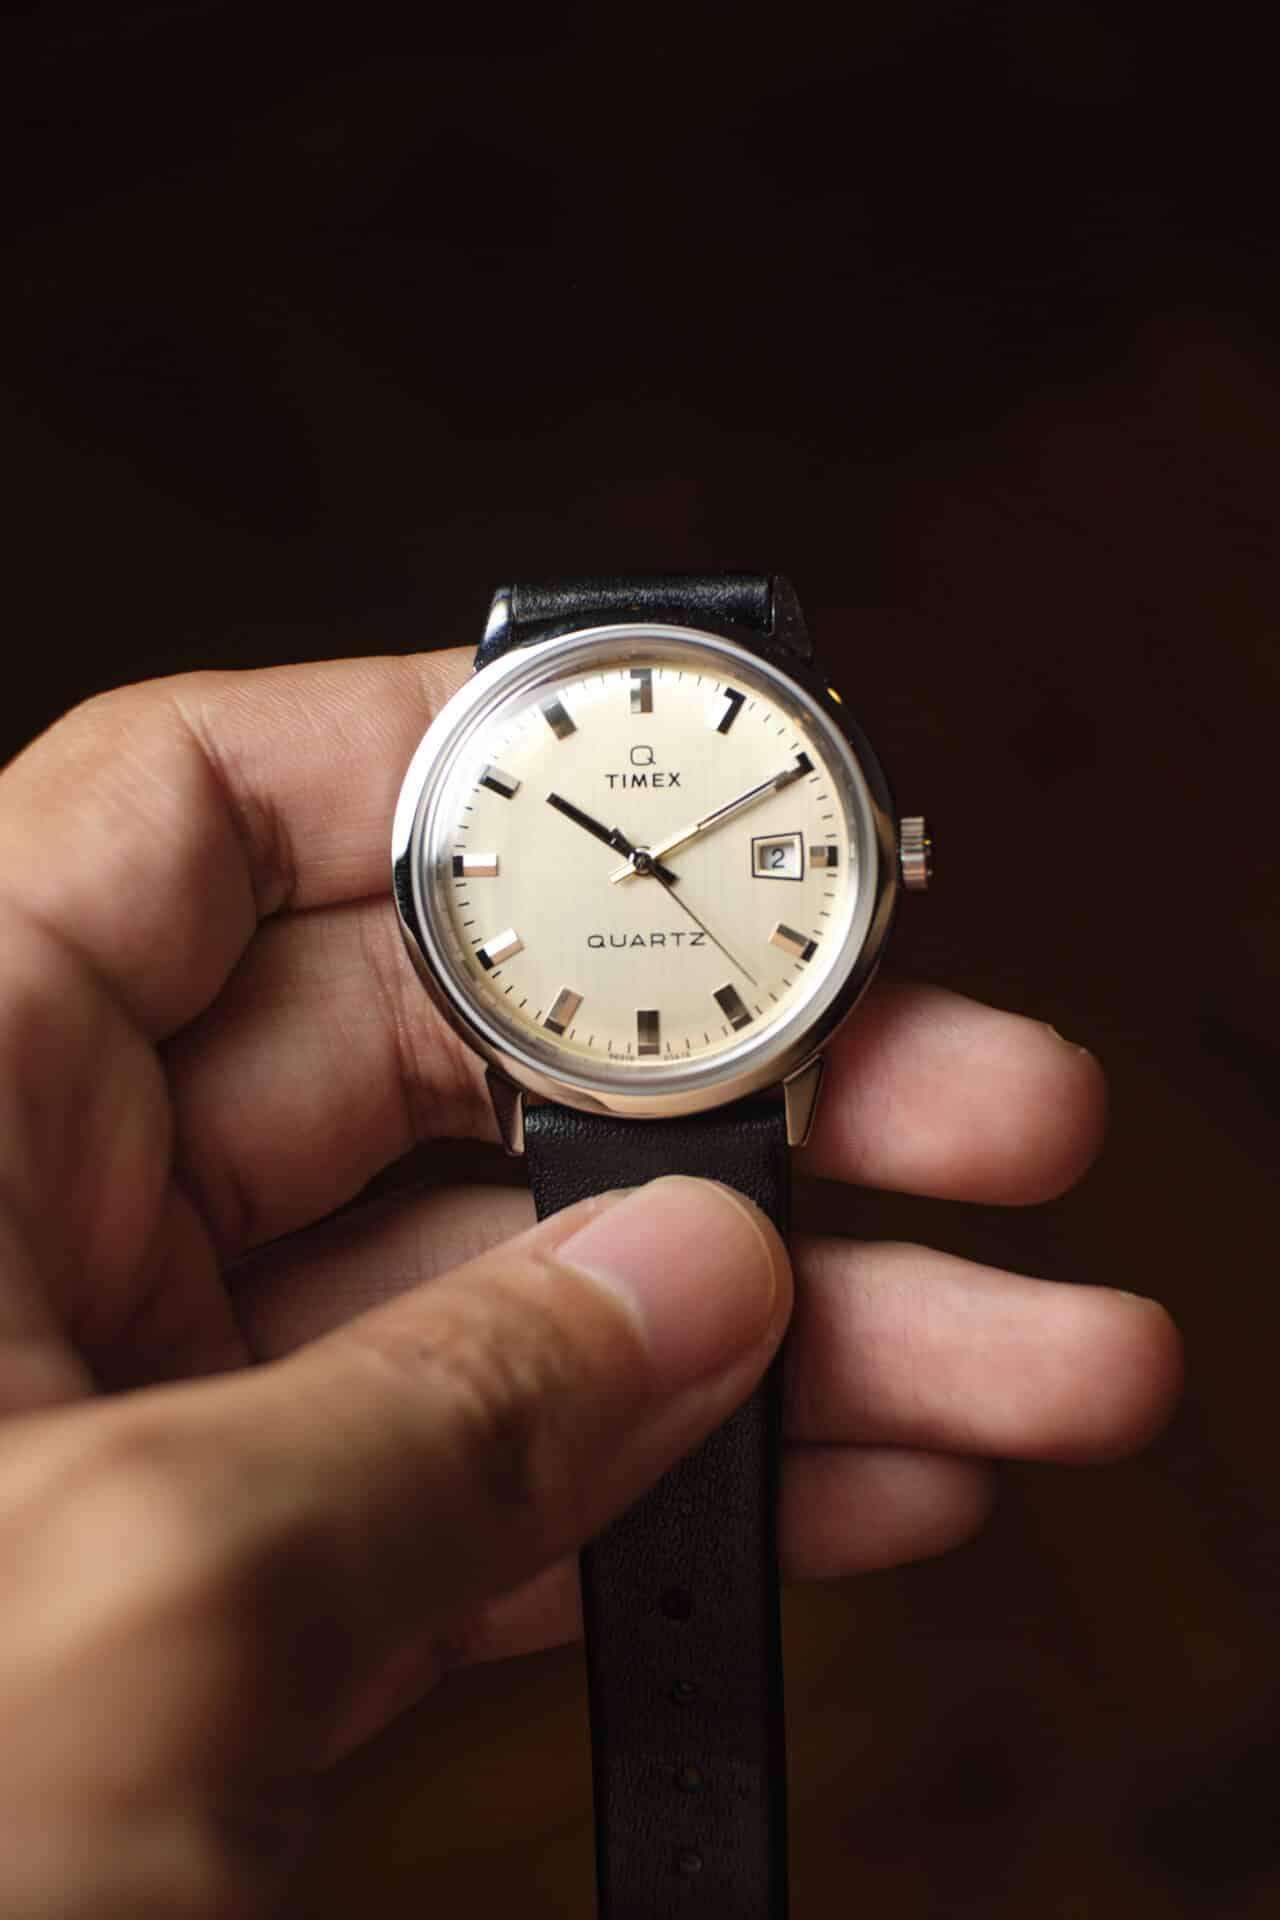 Holding the Timex Q 1978 Reissue Date